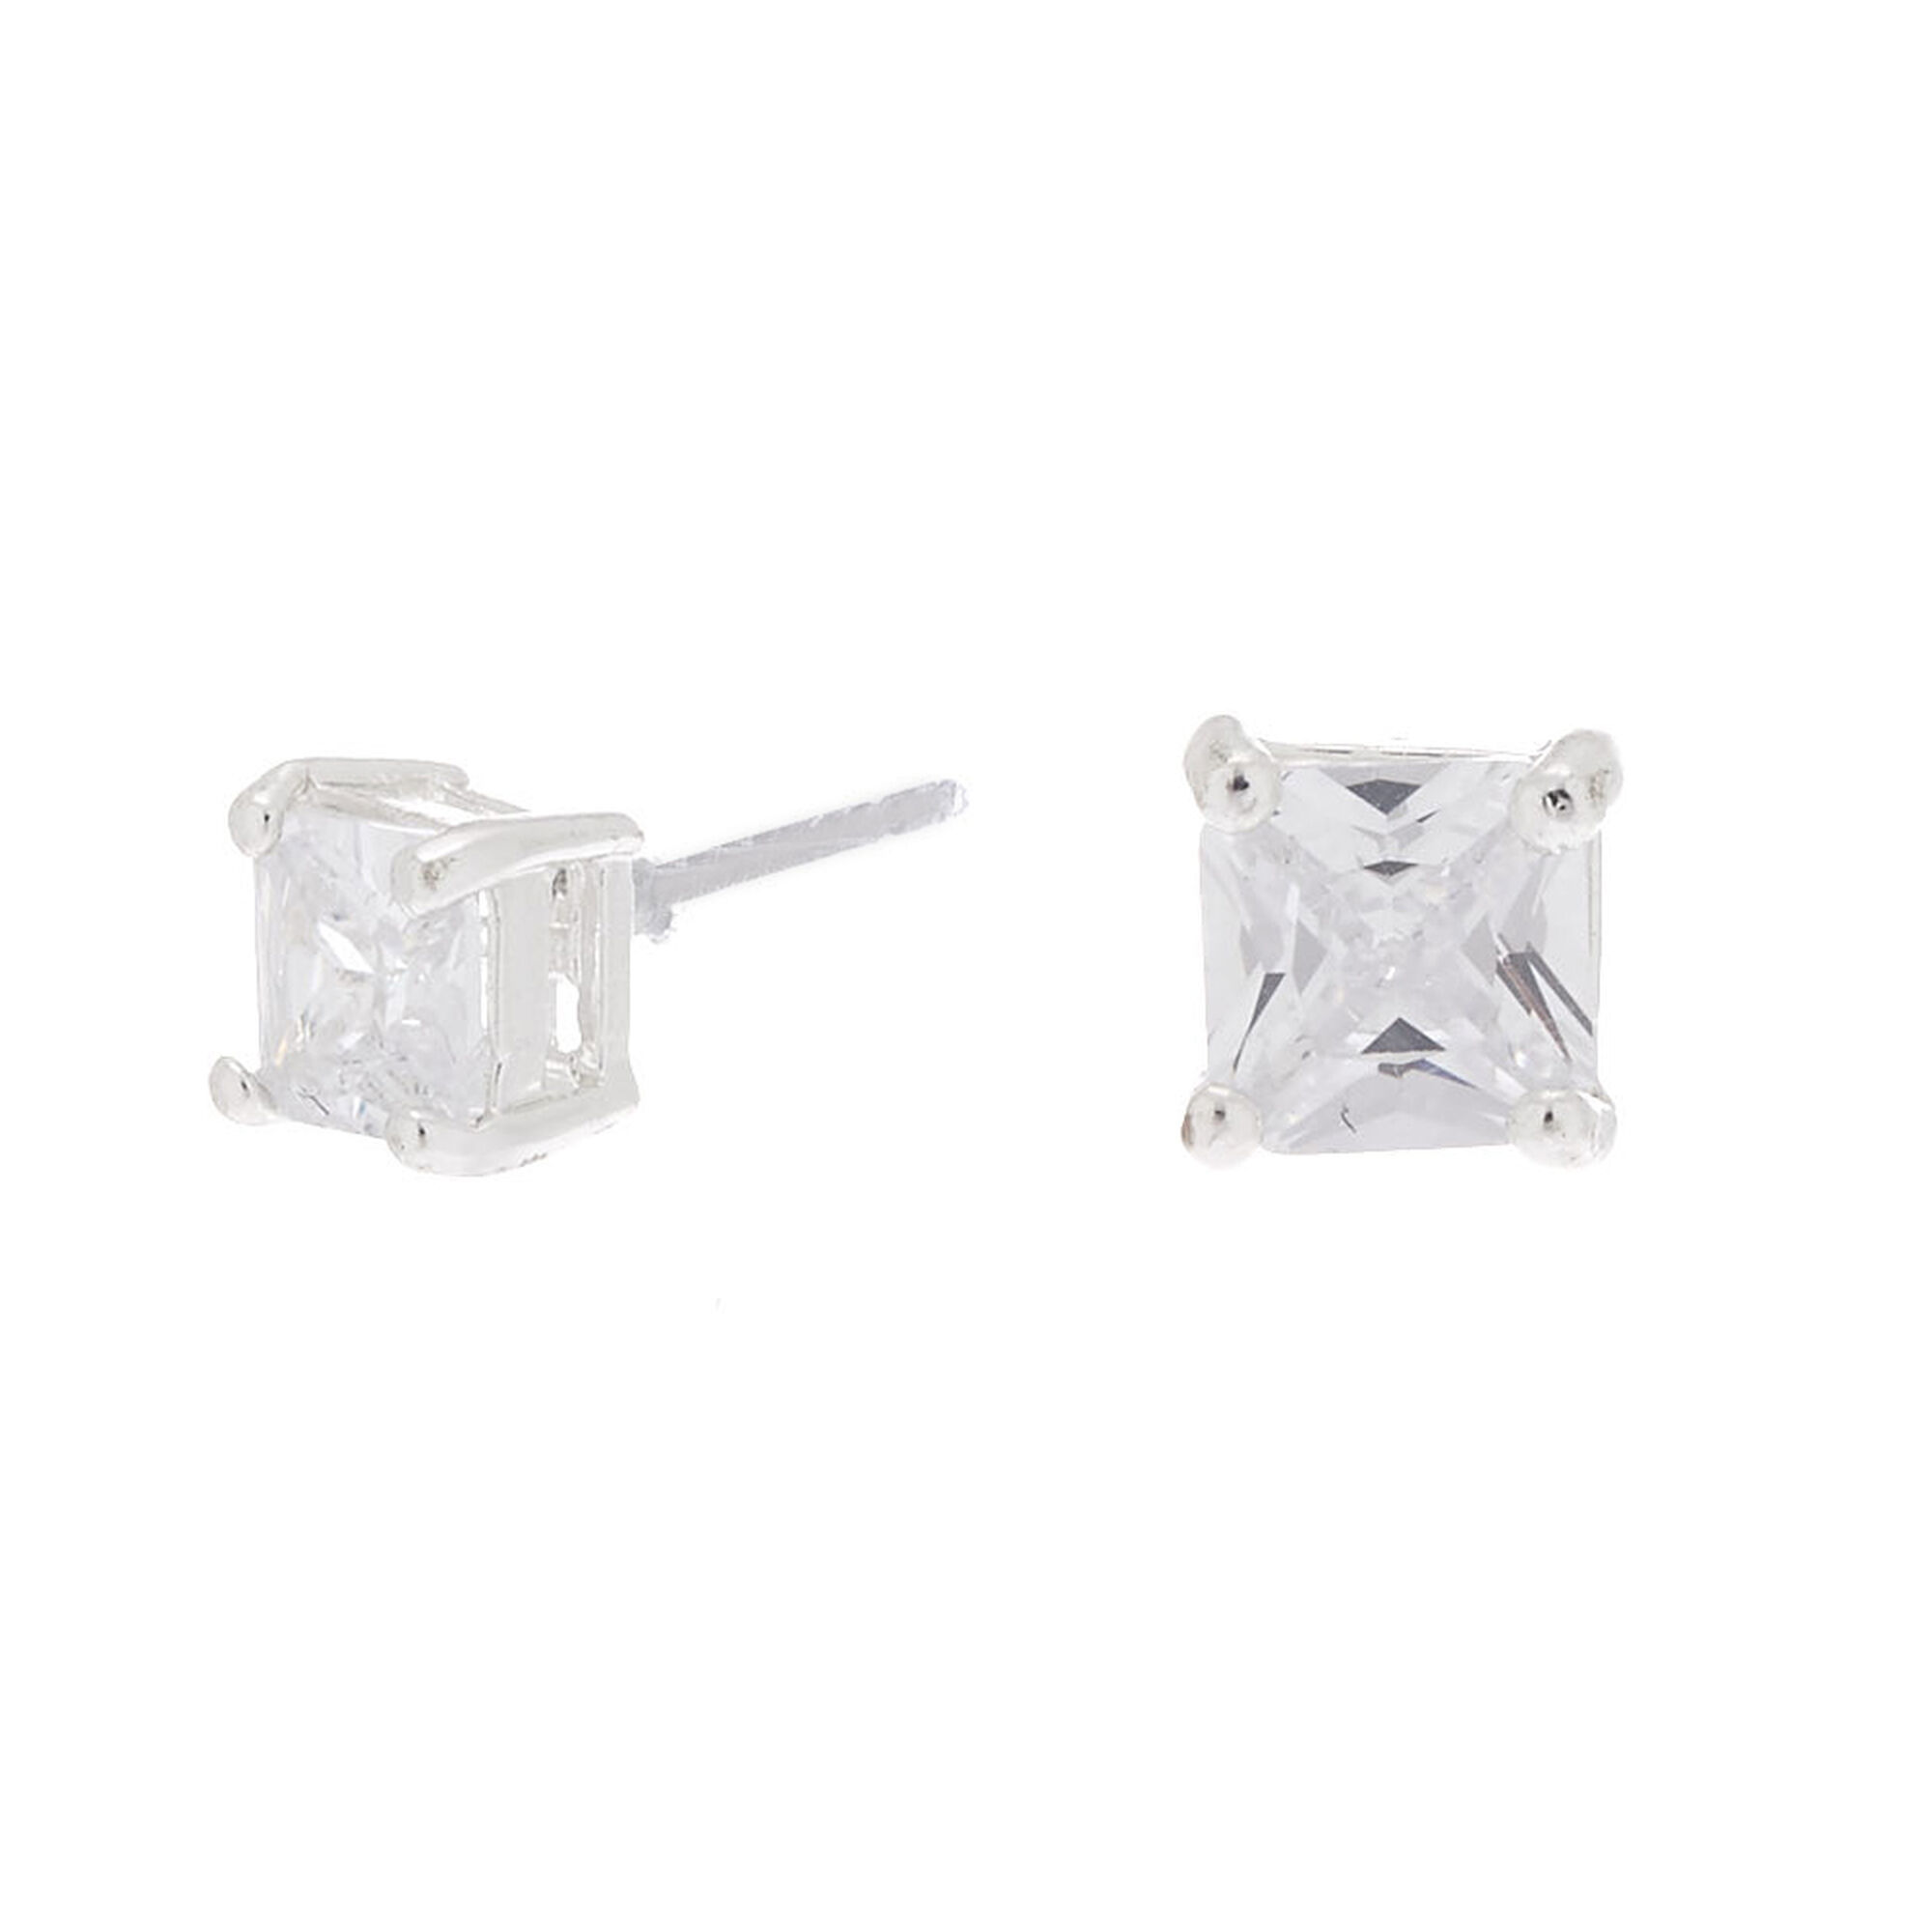 View Claires Tone Cubic Zirconia Square Stud Earrings 5MM Silver information